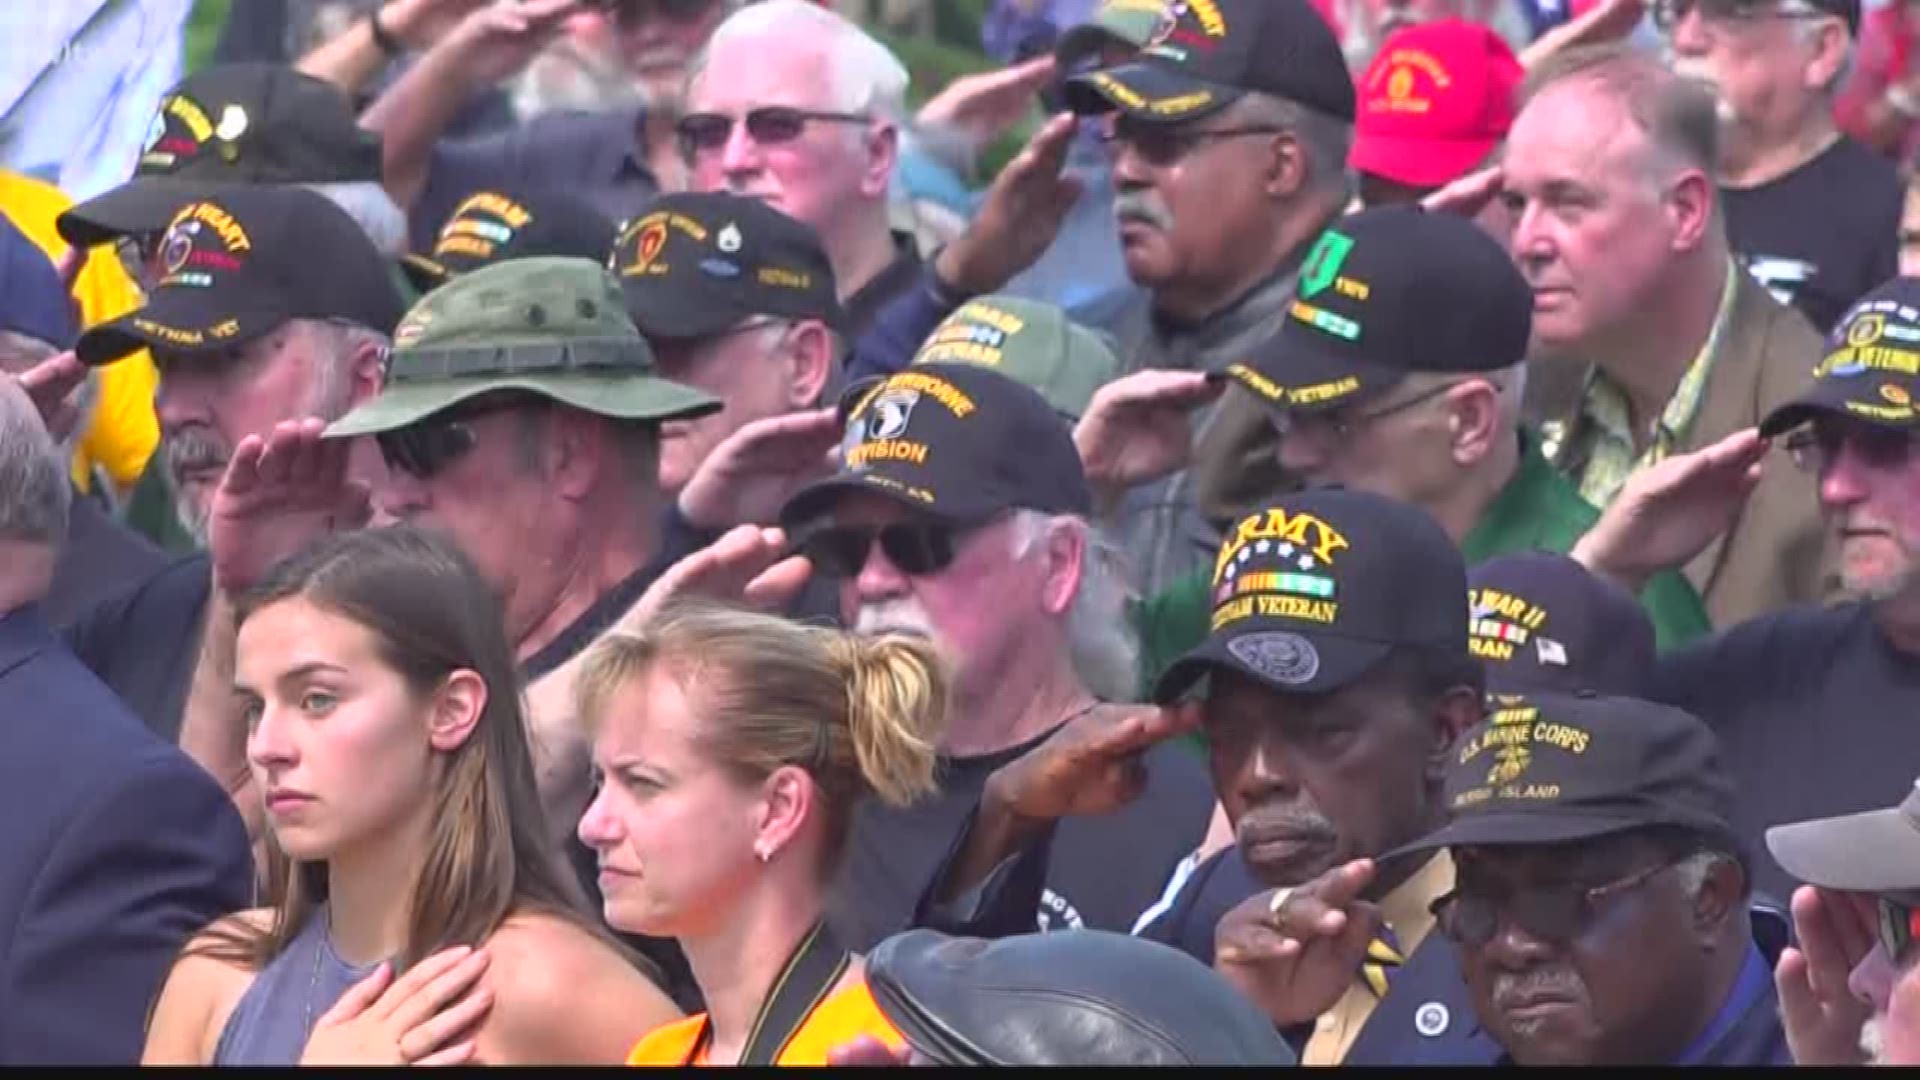 Today marks a special day for Vietnam veterans, and a welcome home celebration they've been waiting for over 40 years.